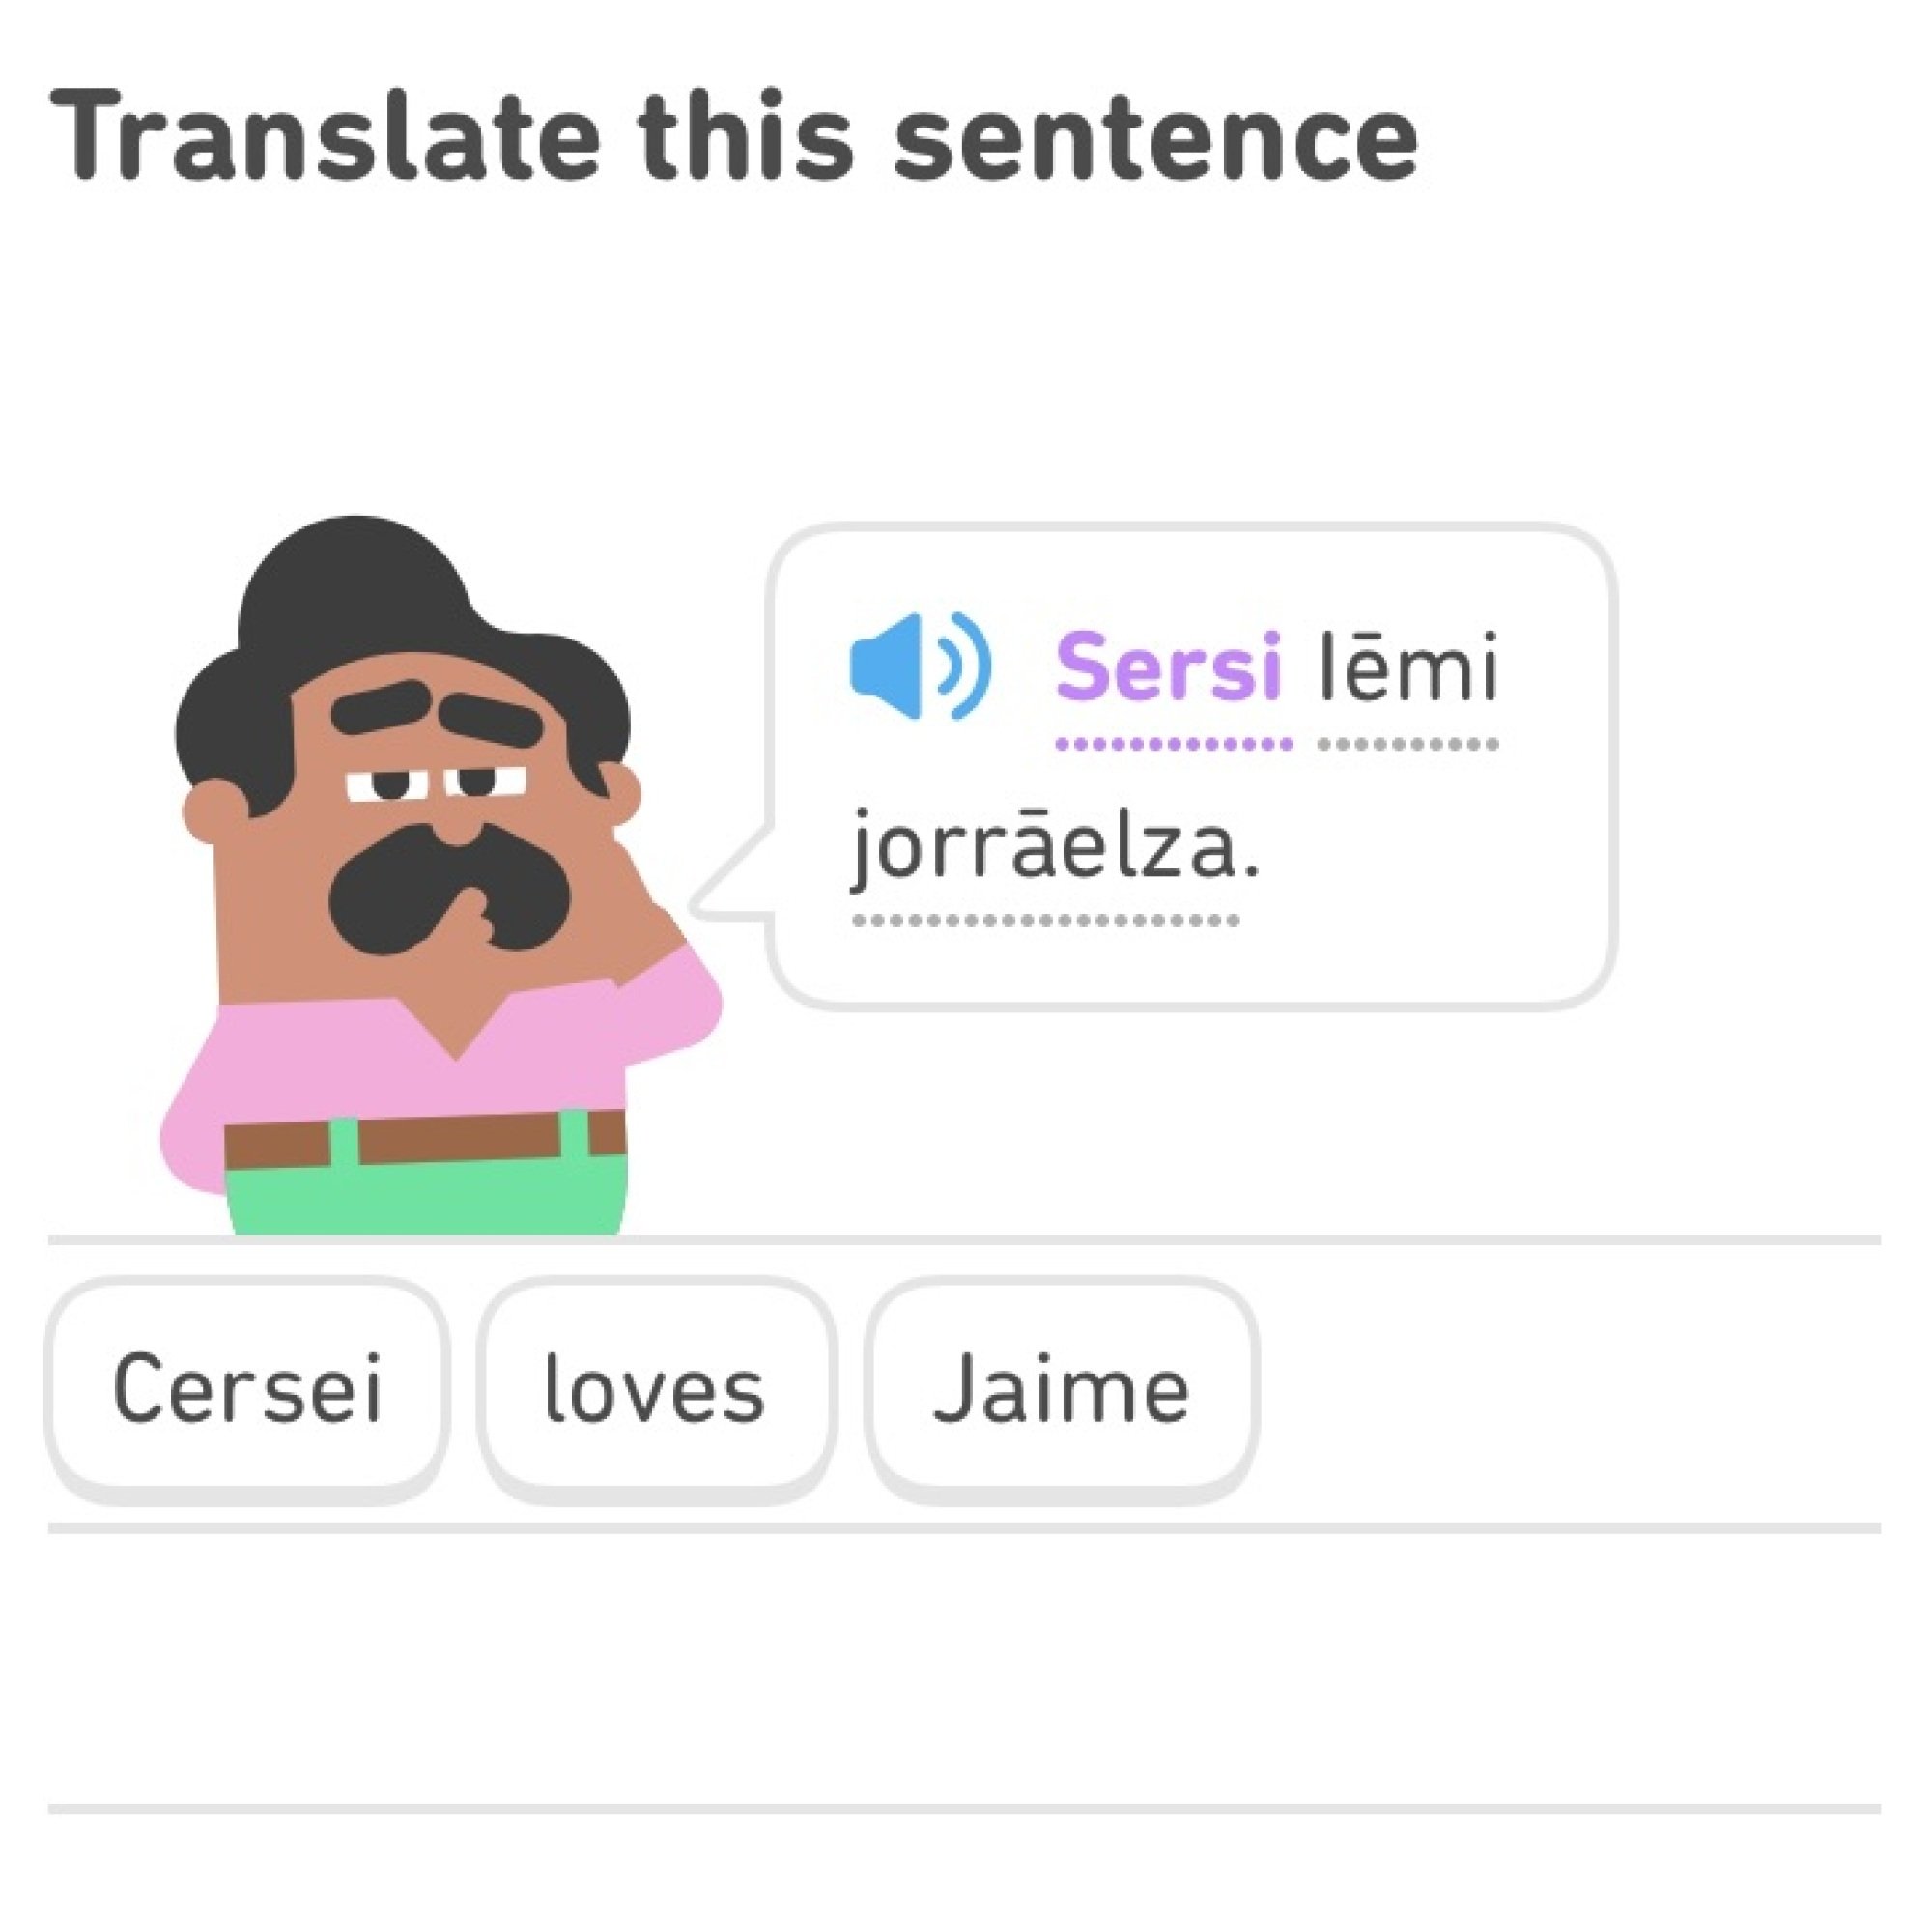 A Duolingo exercise translating the phrase "Cersei loves Jaime" from High Valyrian.